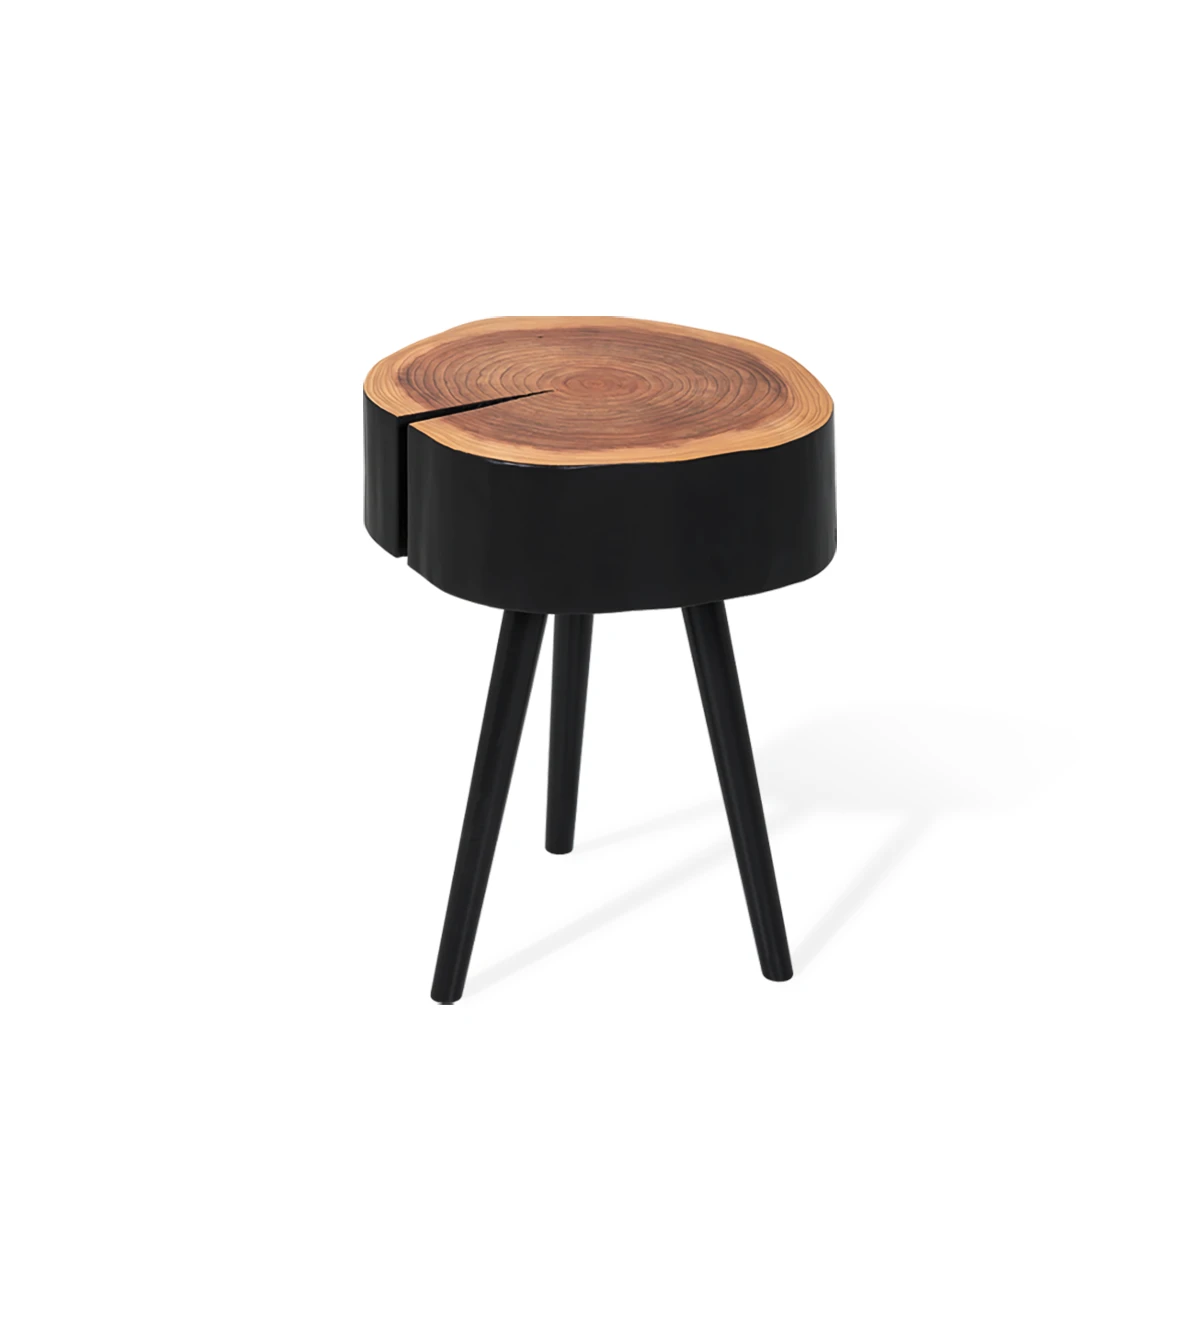 Trunk side table in natural cryptomeria wood lacquered in black, black lacquered feet, Ø 35 to 45 cm.